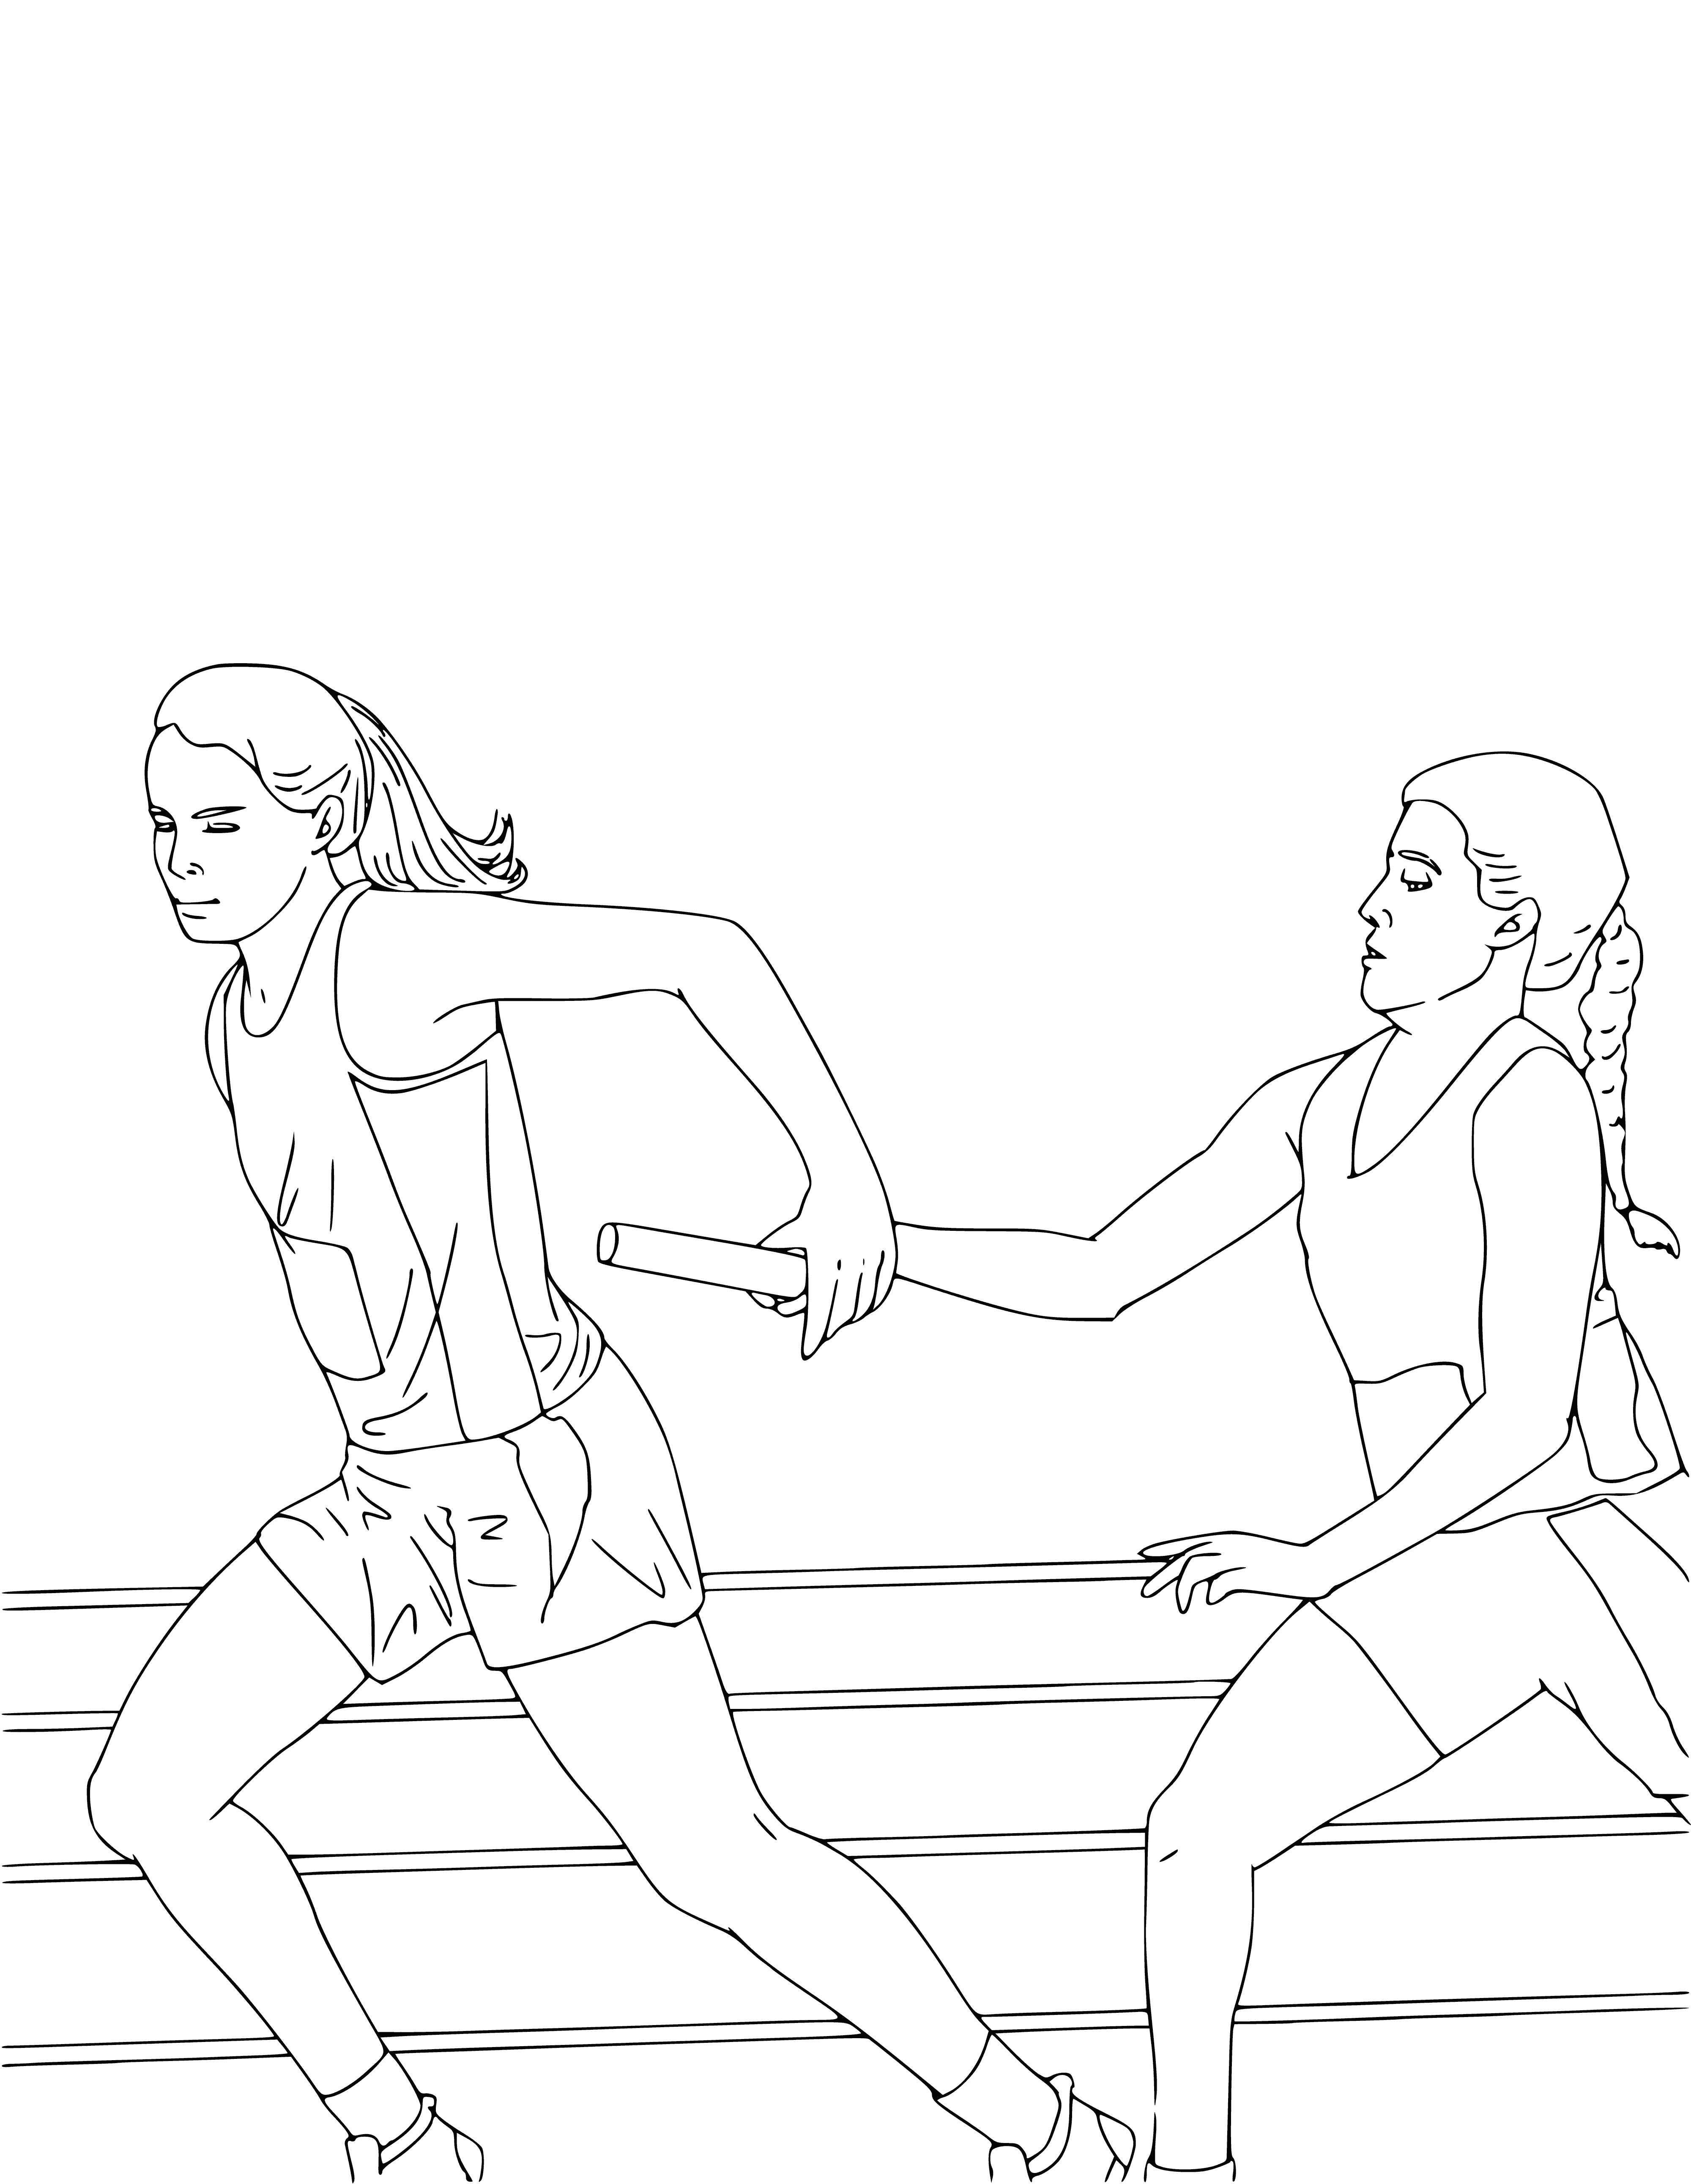 Athletics. Relay race coloring page